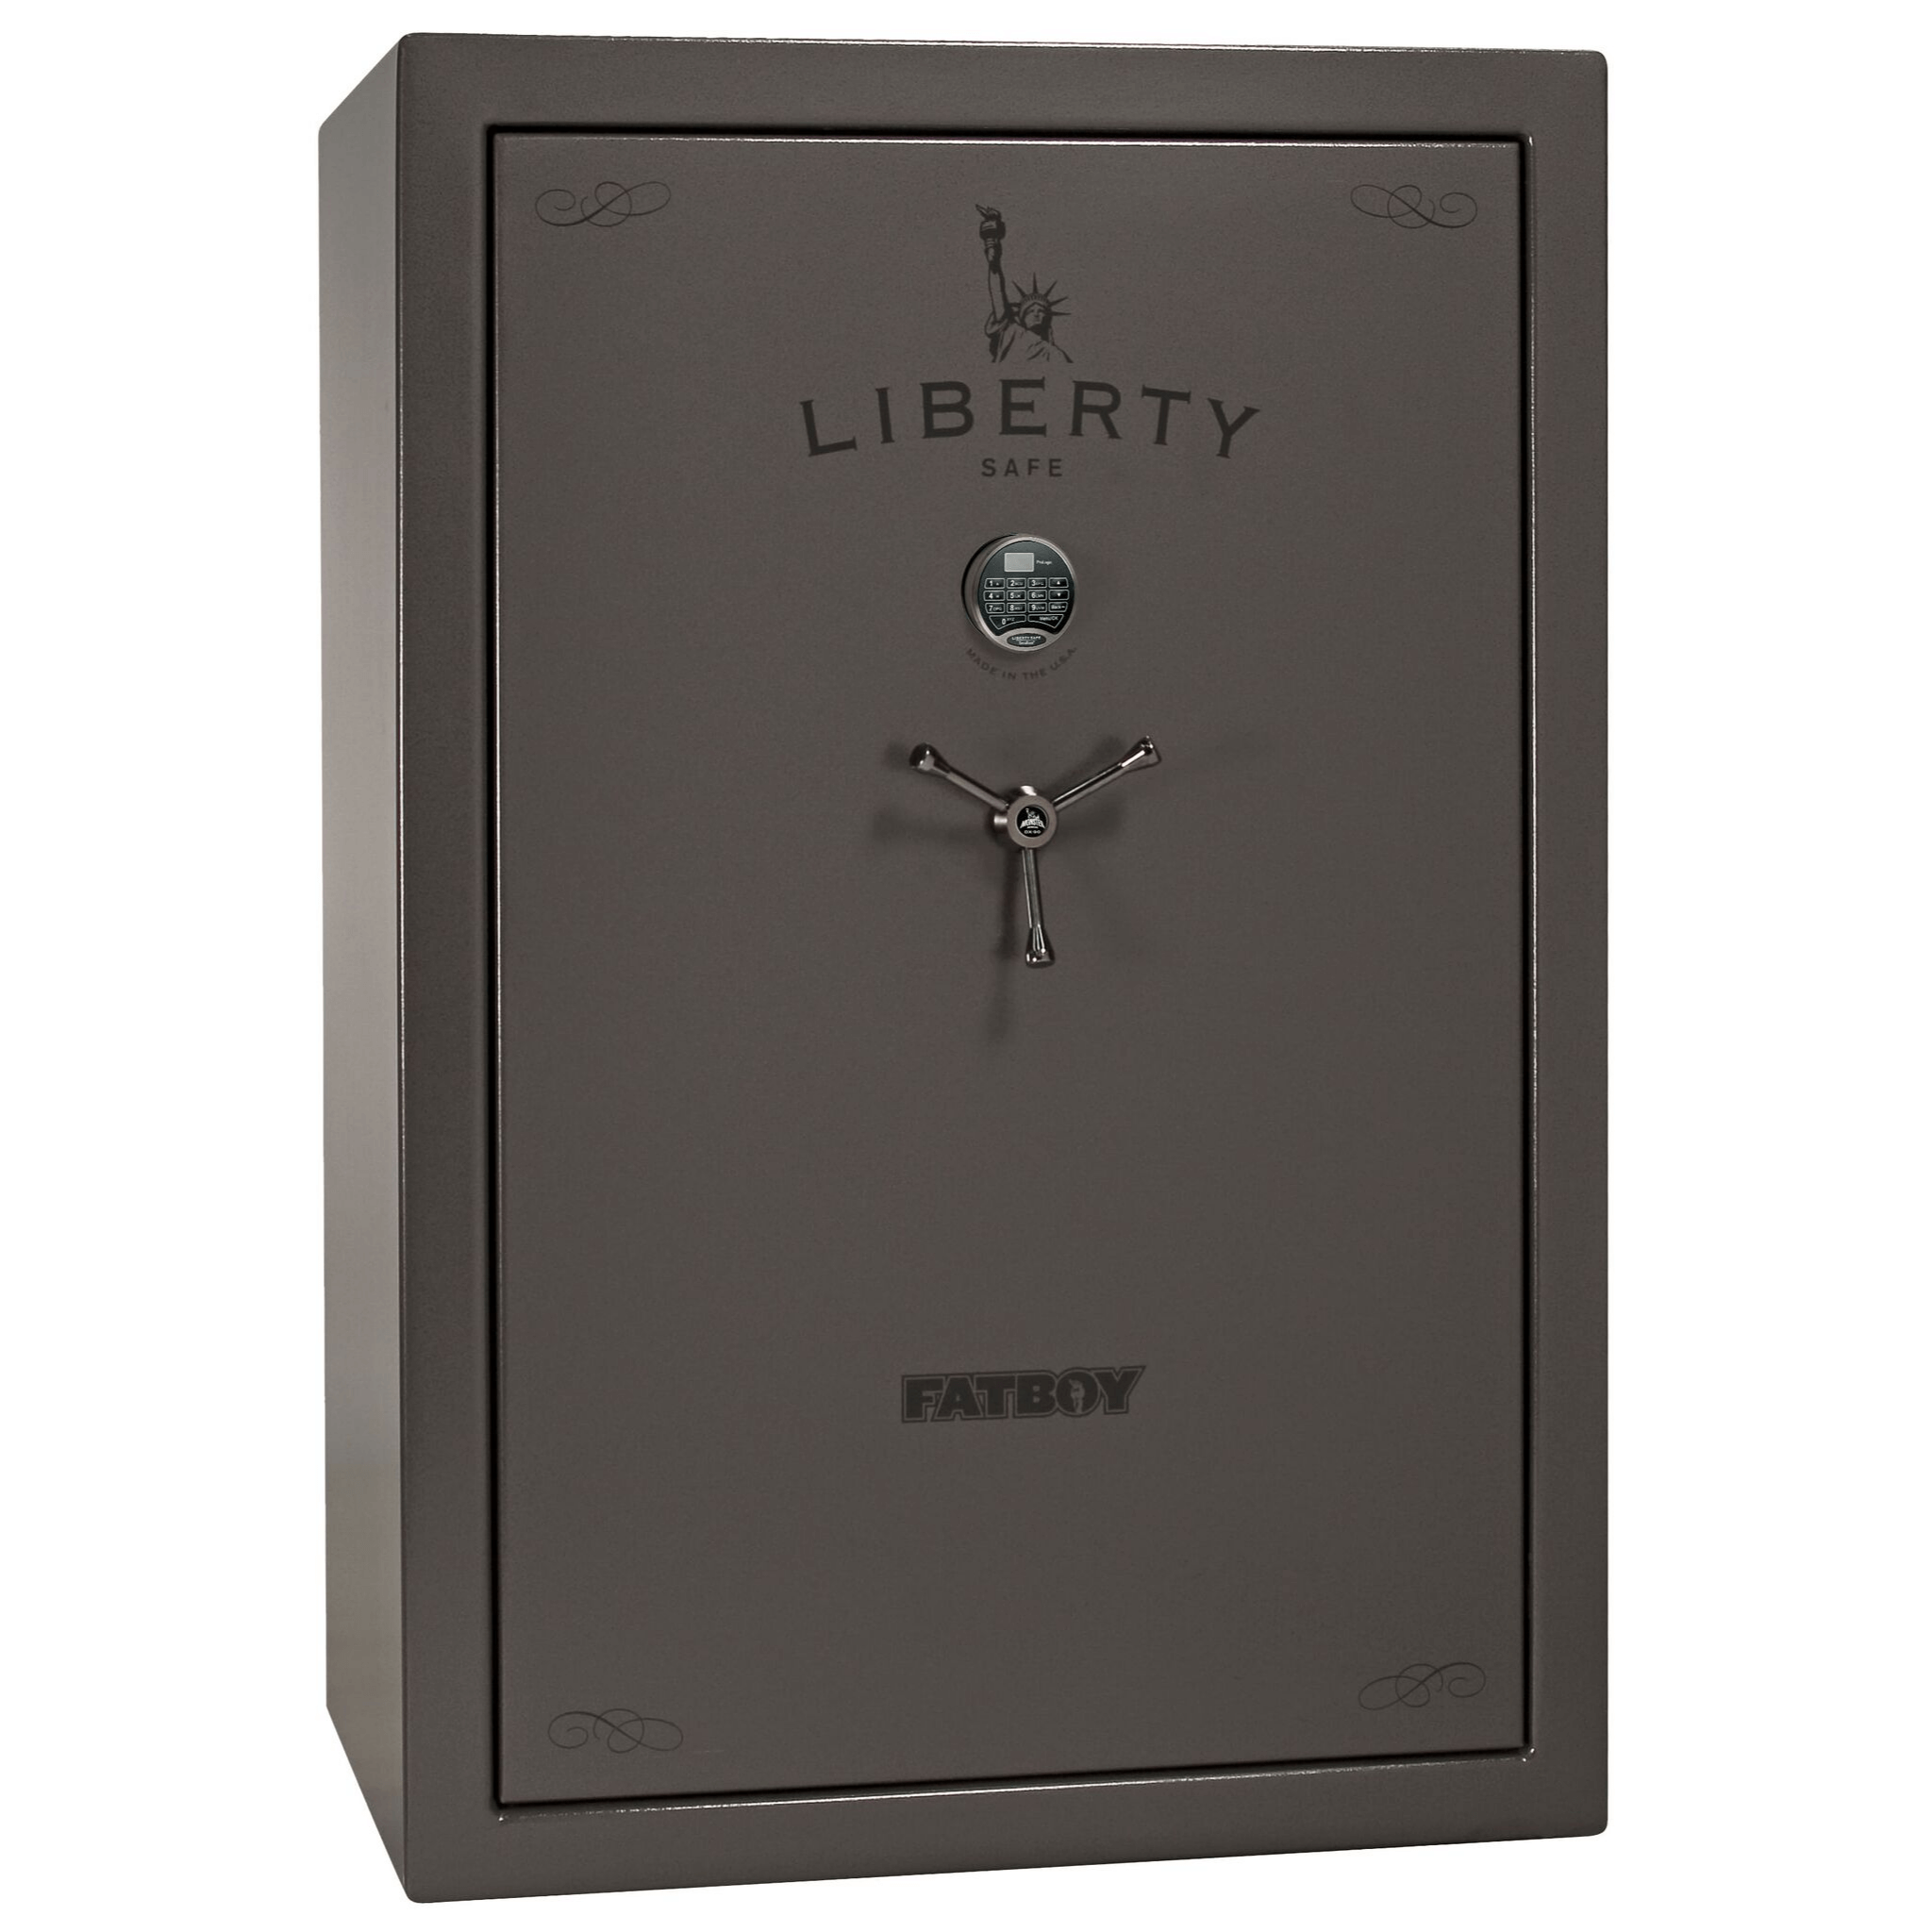 Fatboy Series | Level 4 Security | 90 Minute Fire Protection | 64XT | Dimensions: 60.5"(H) x 42"(W) x 32"(D) | Extreme 6 in 1 Flex Interior | Black Textured | Mechanical Lock